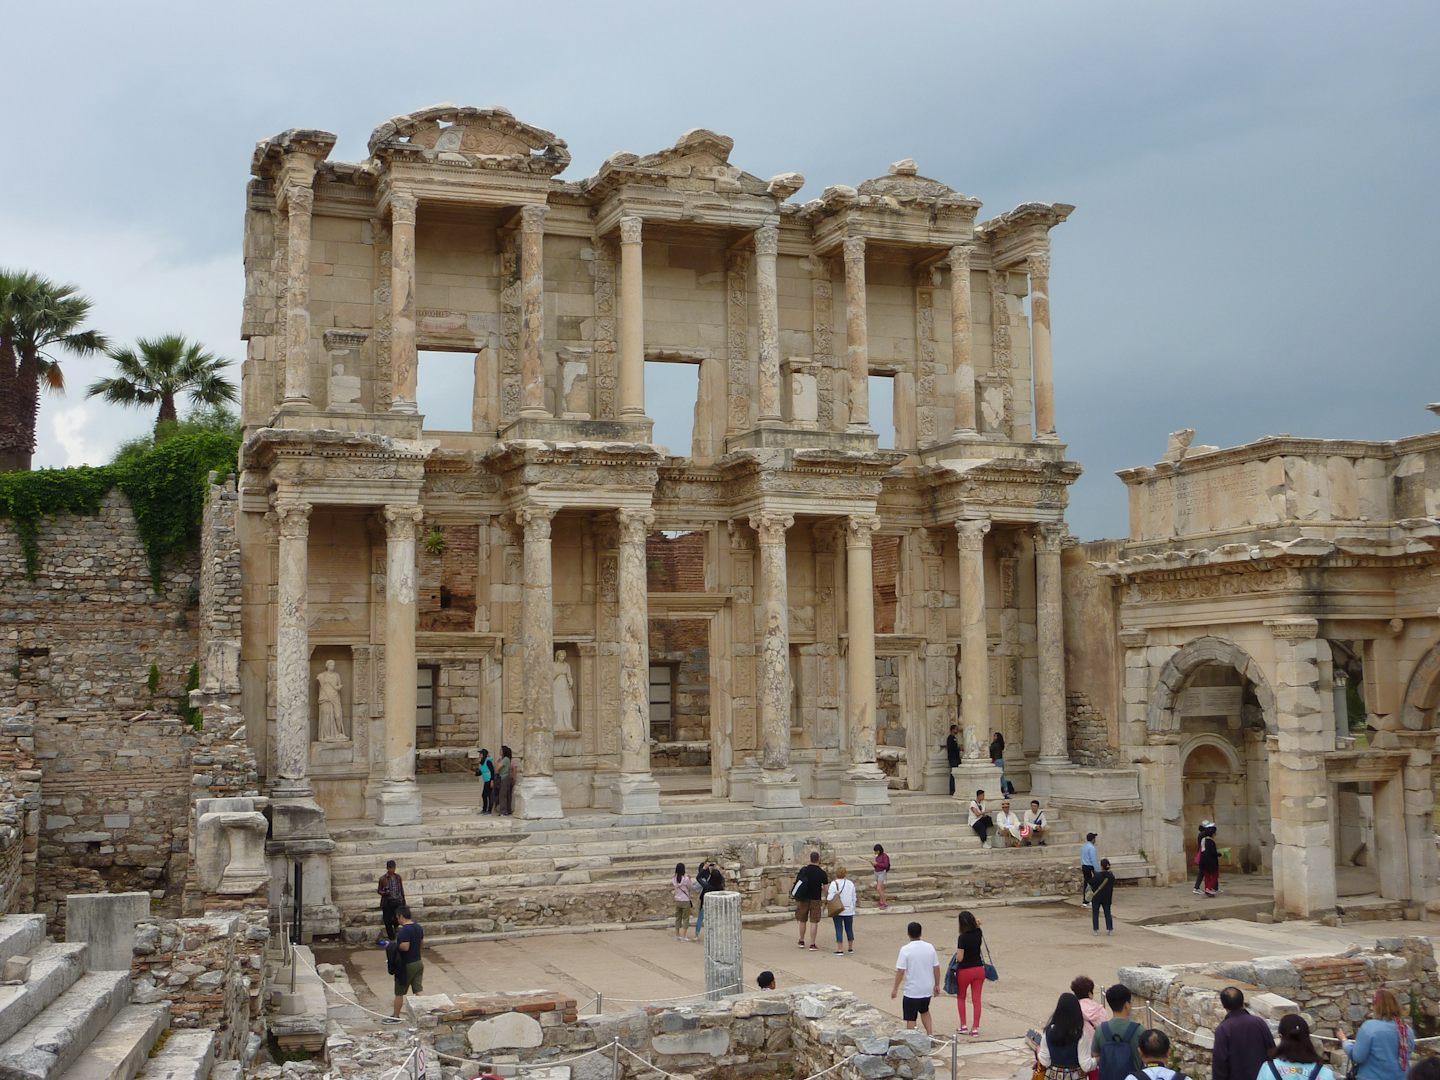 The library in Ephesus